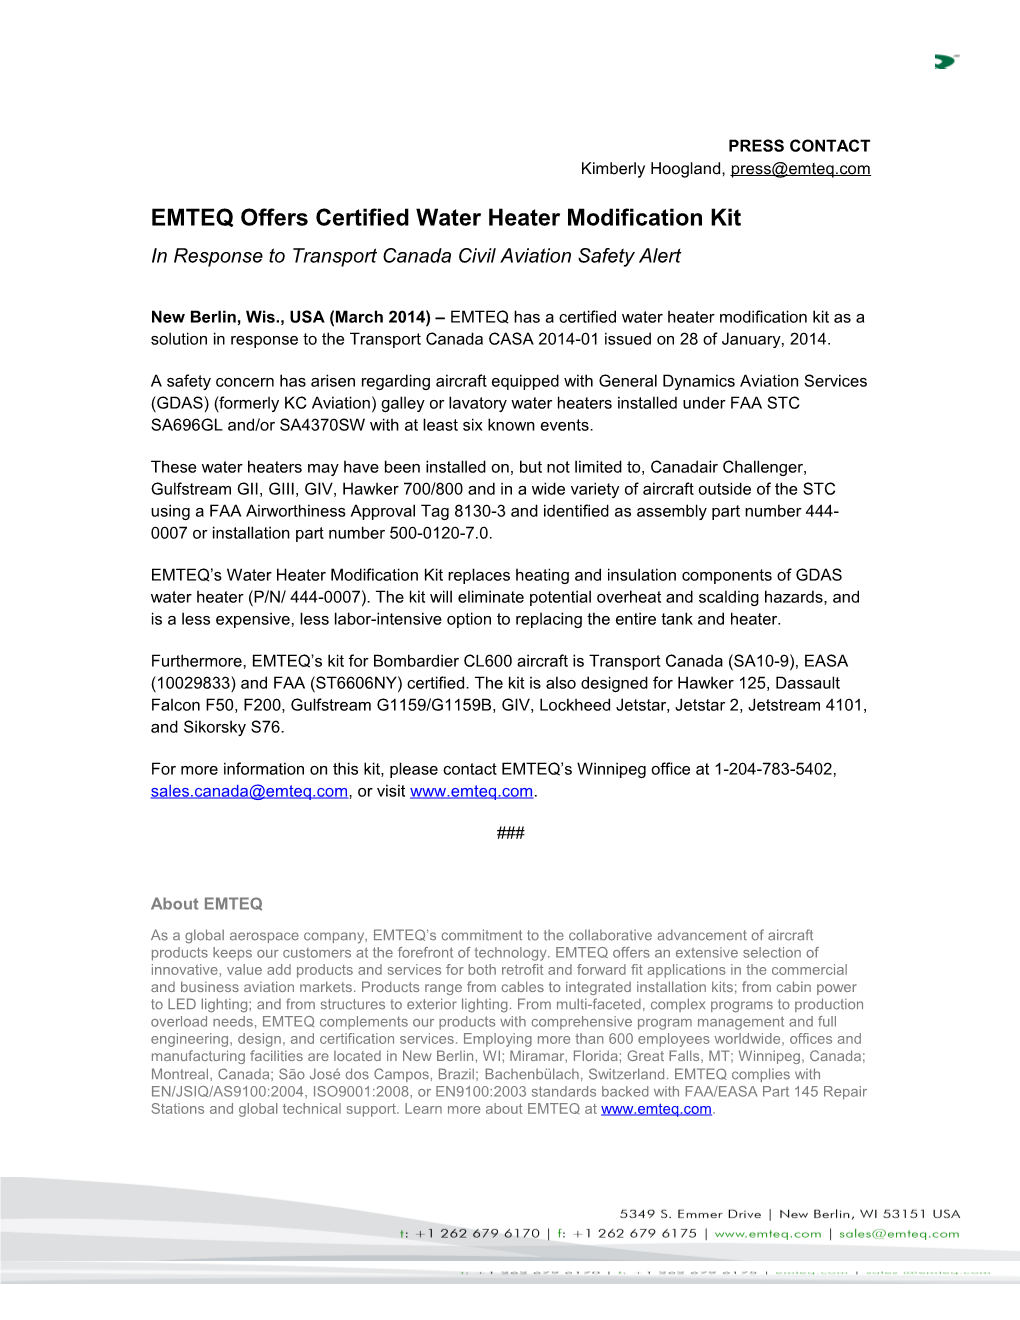 EMTEQ Offers Certified Water Heater Modification Kit